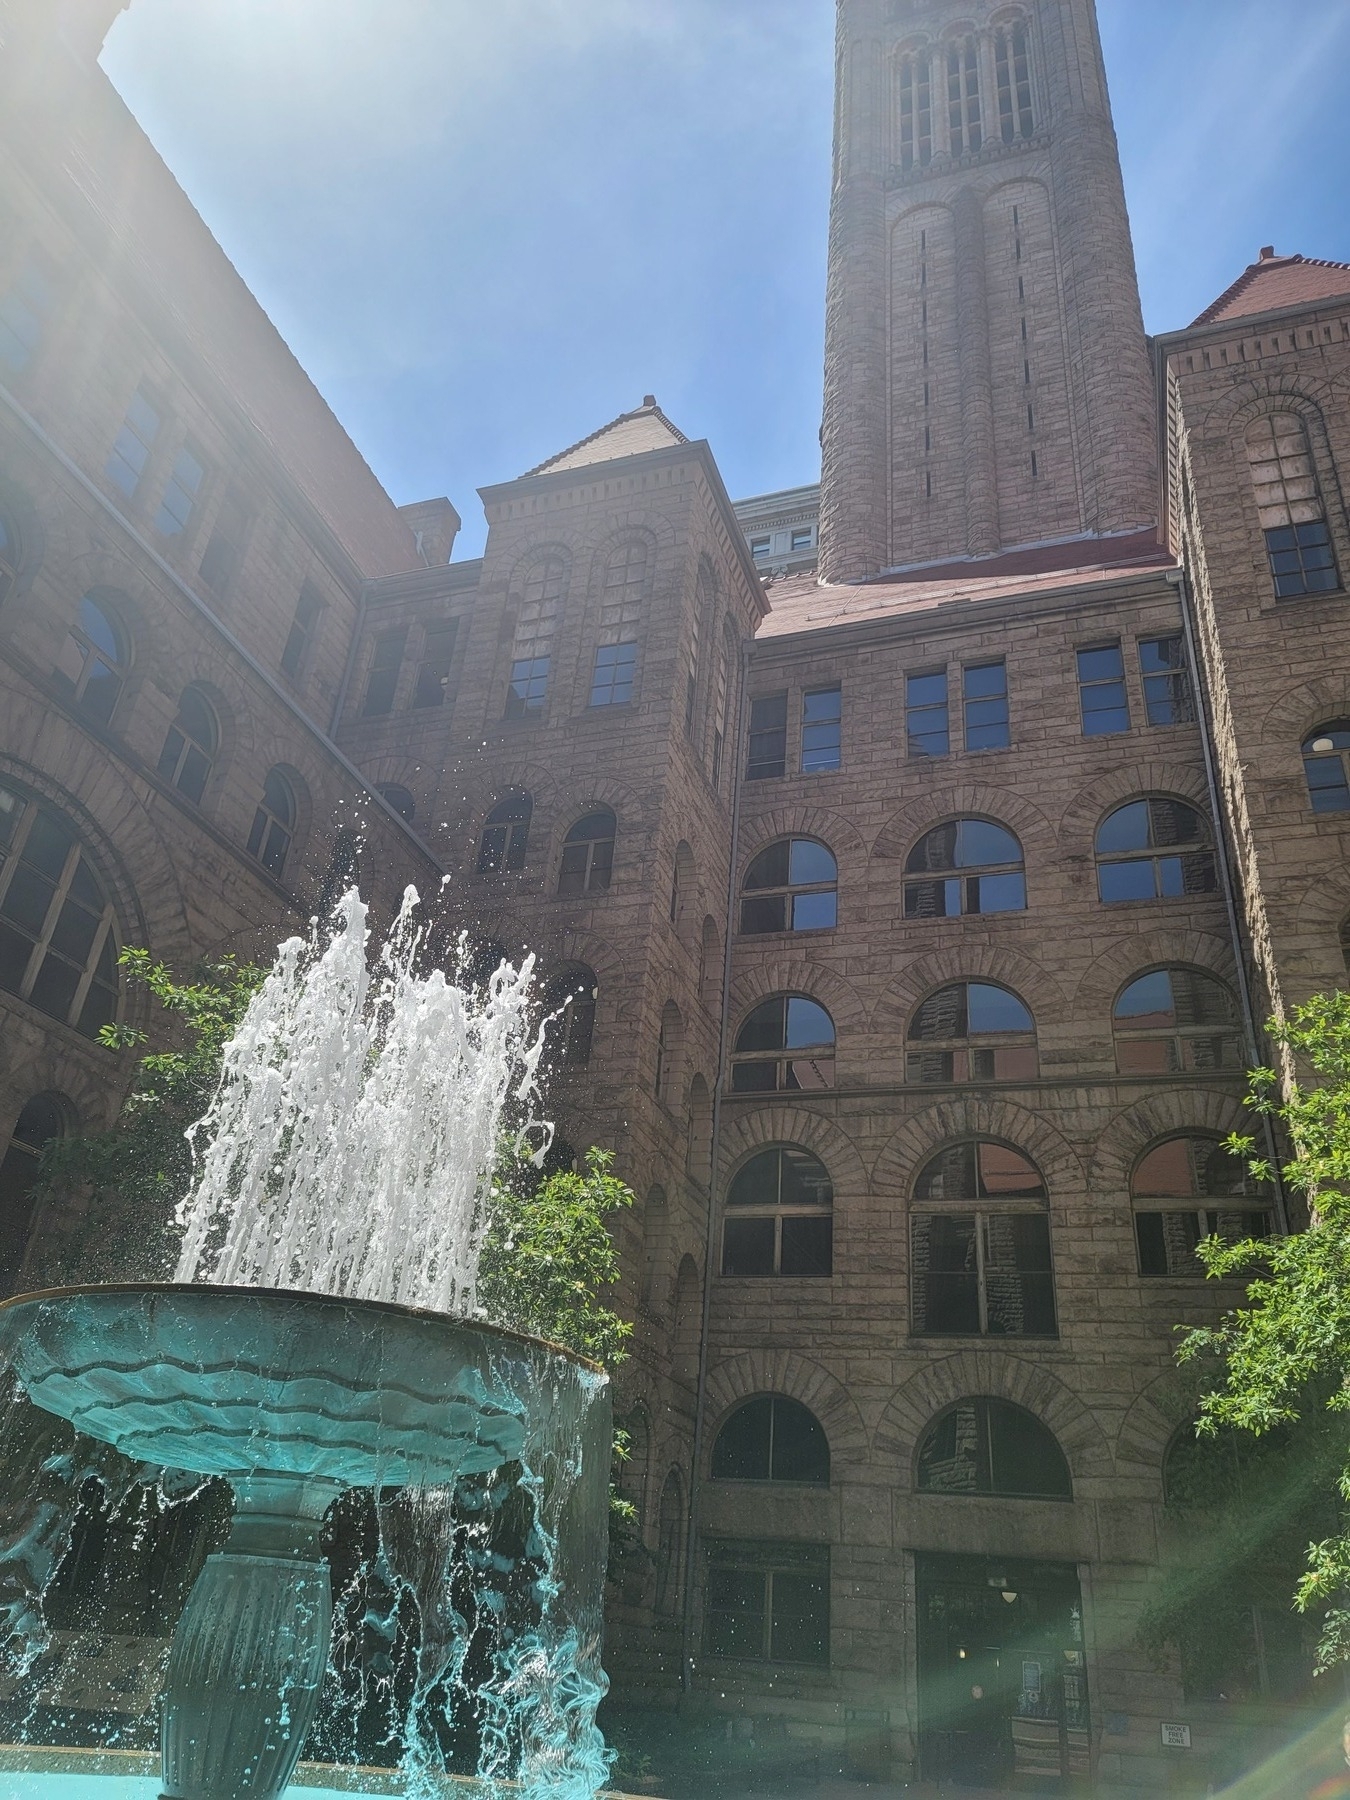 fountain in lower left corner with water spurting from the top in front of a brown, romanesque revival style building